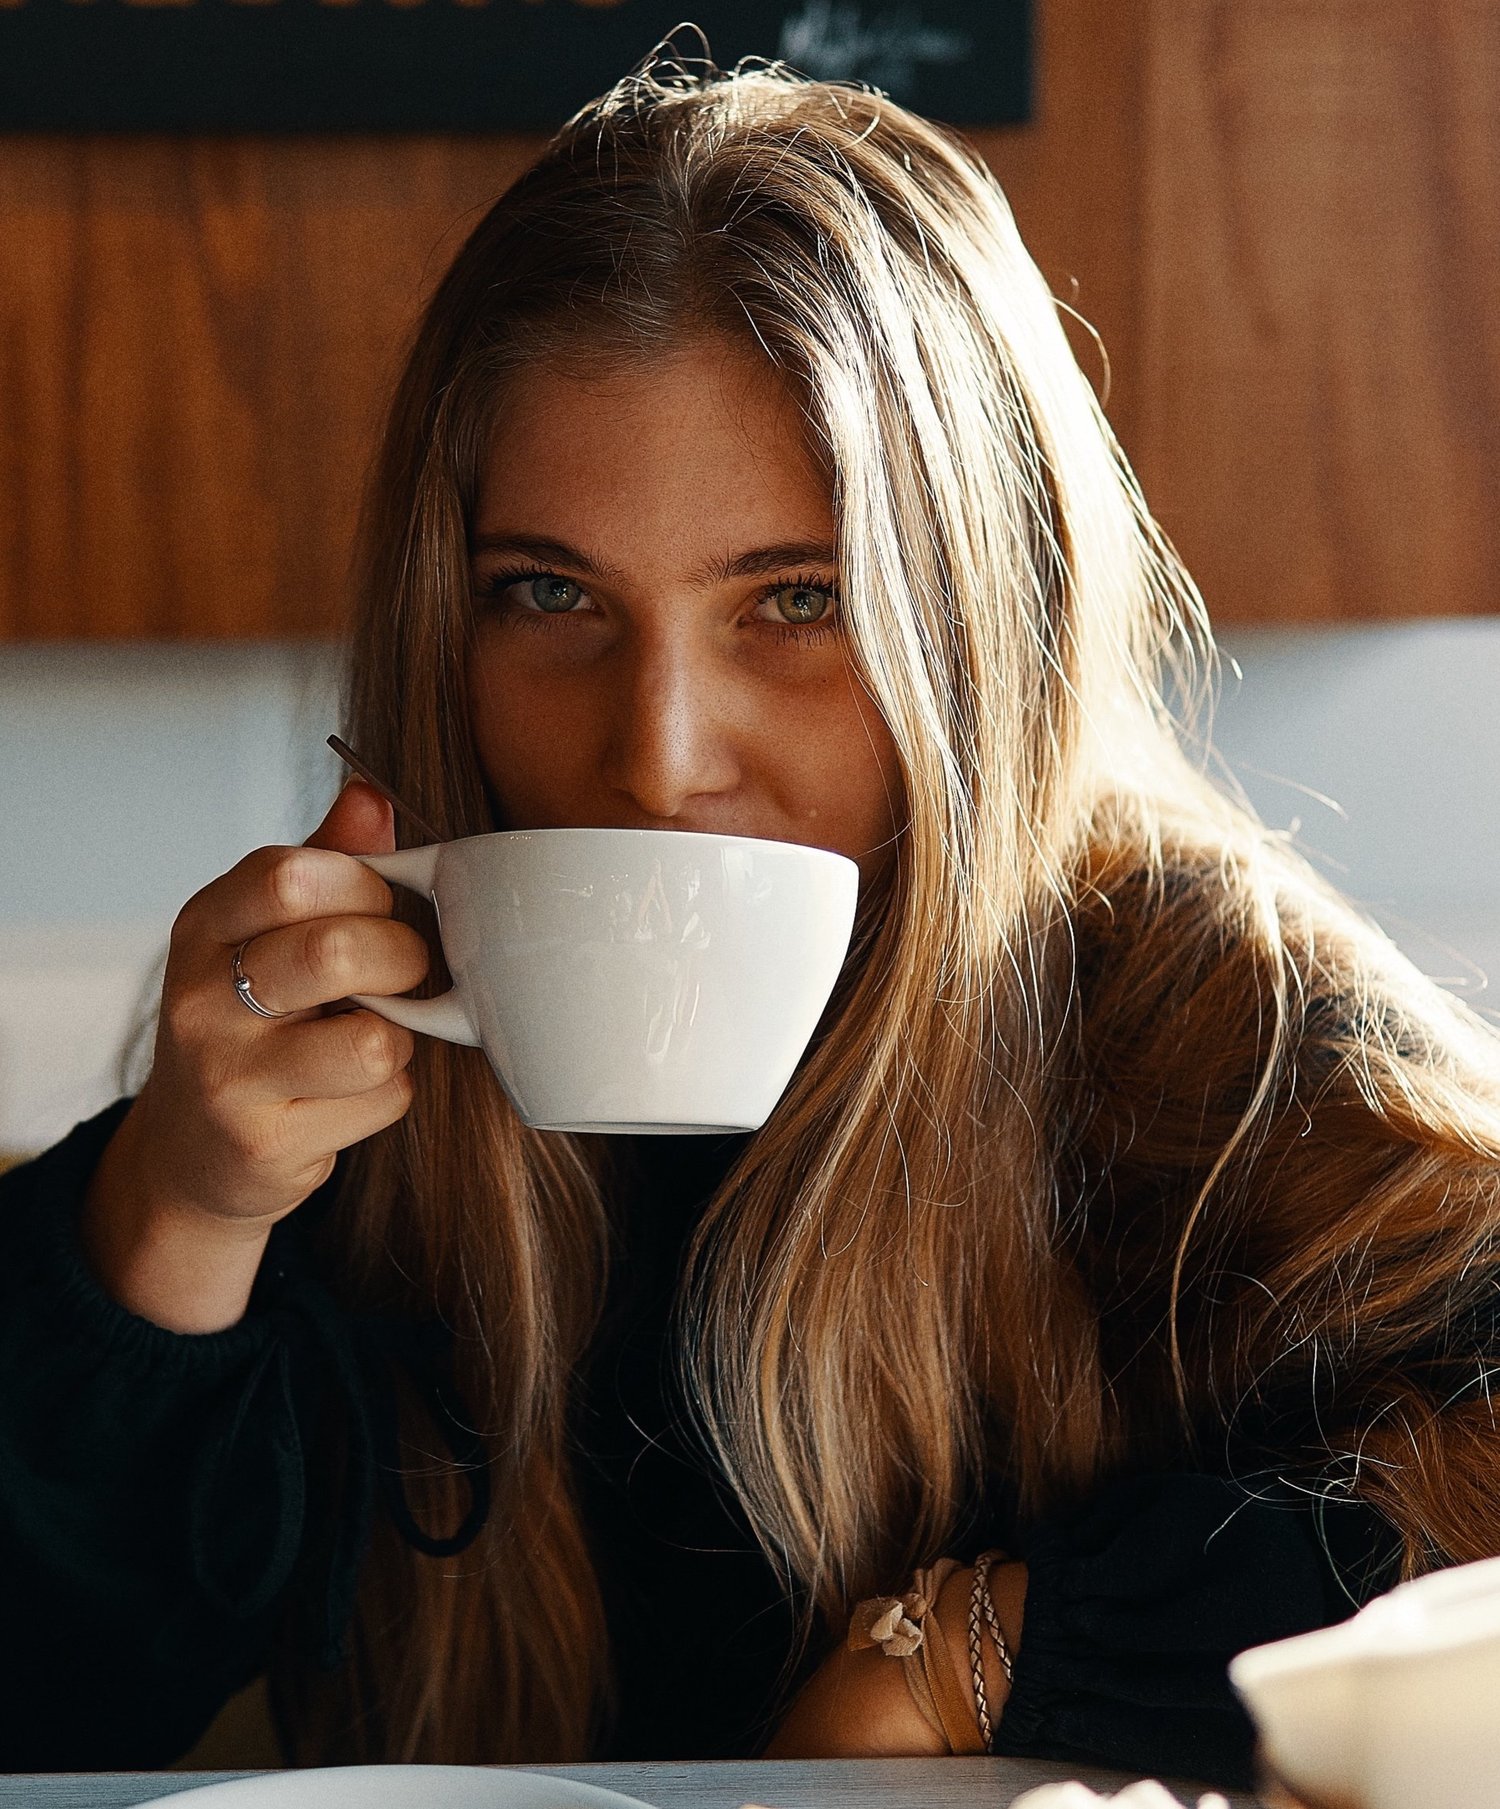 How does a coffee date work?